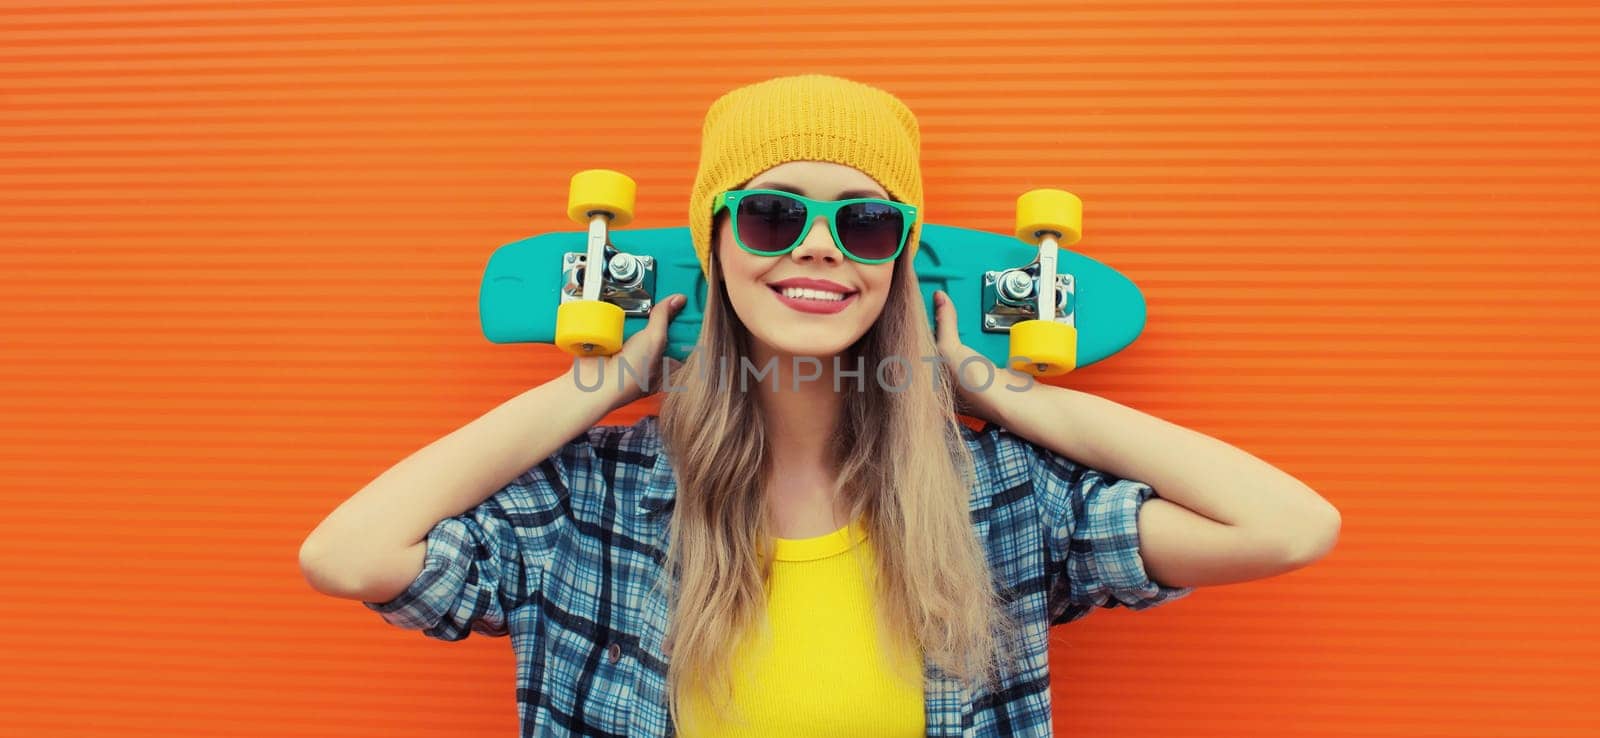 Summer portrait of happy cheerful stylish young woman with skateboard in colorful clothes, yellow hat posing on orange background on city street